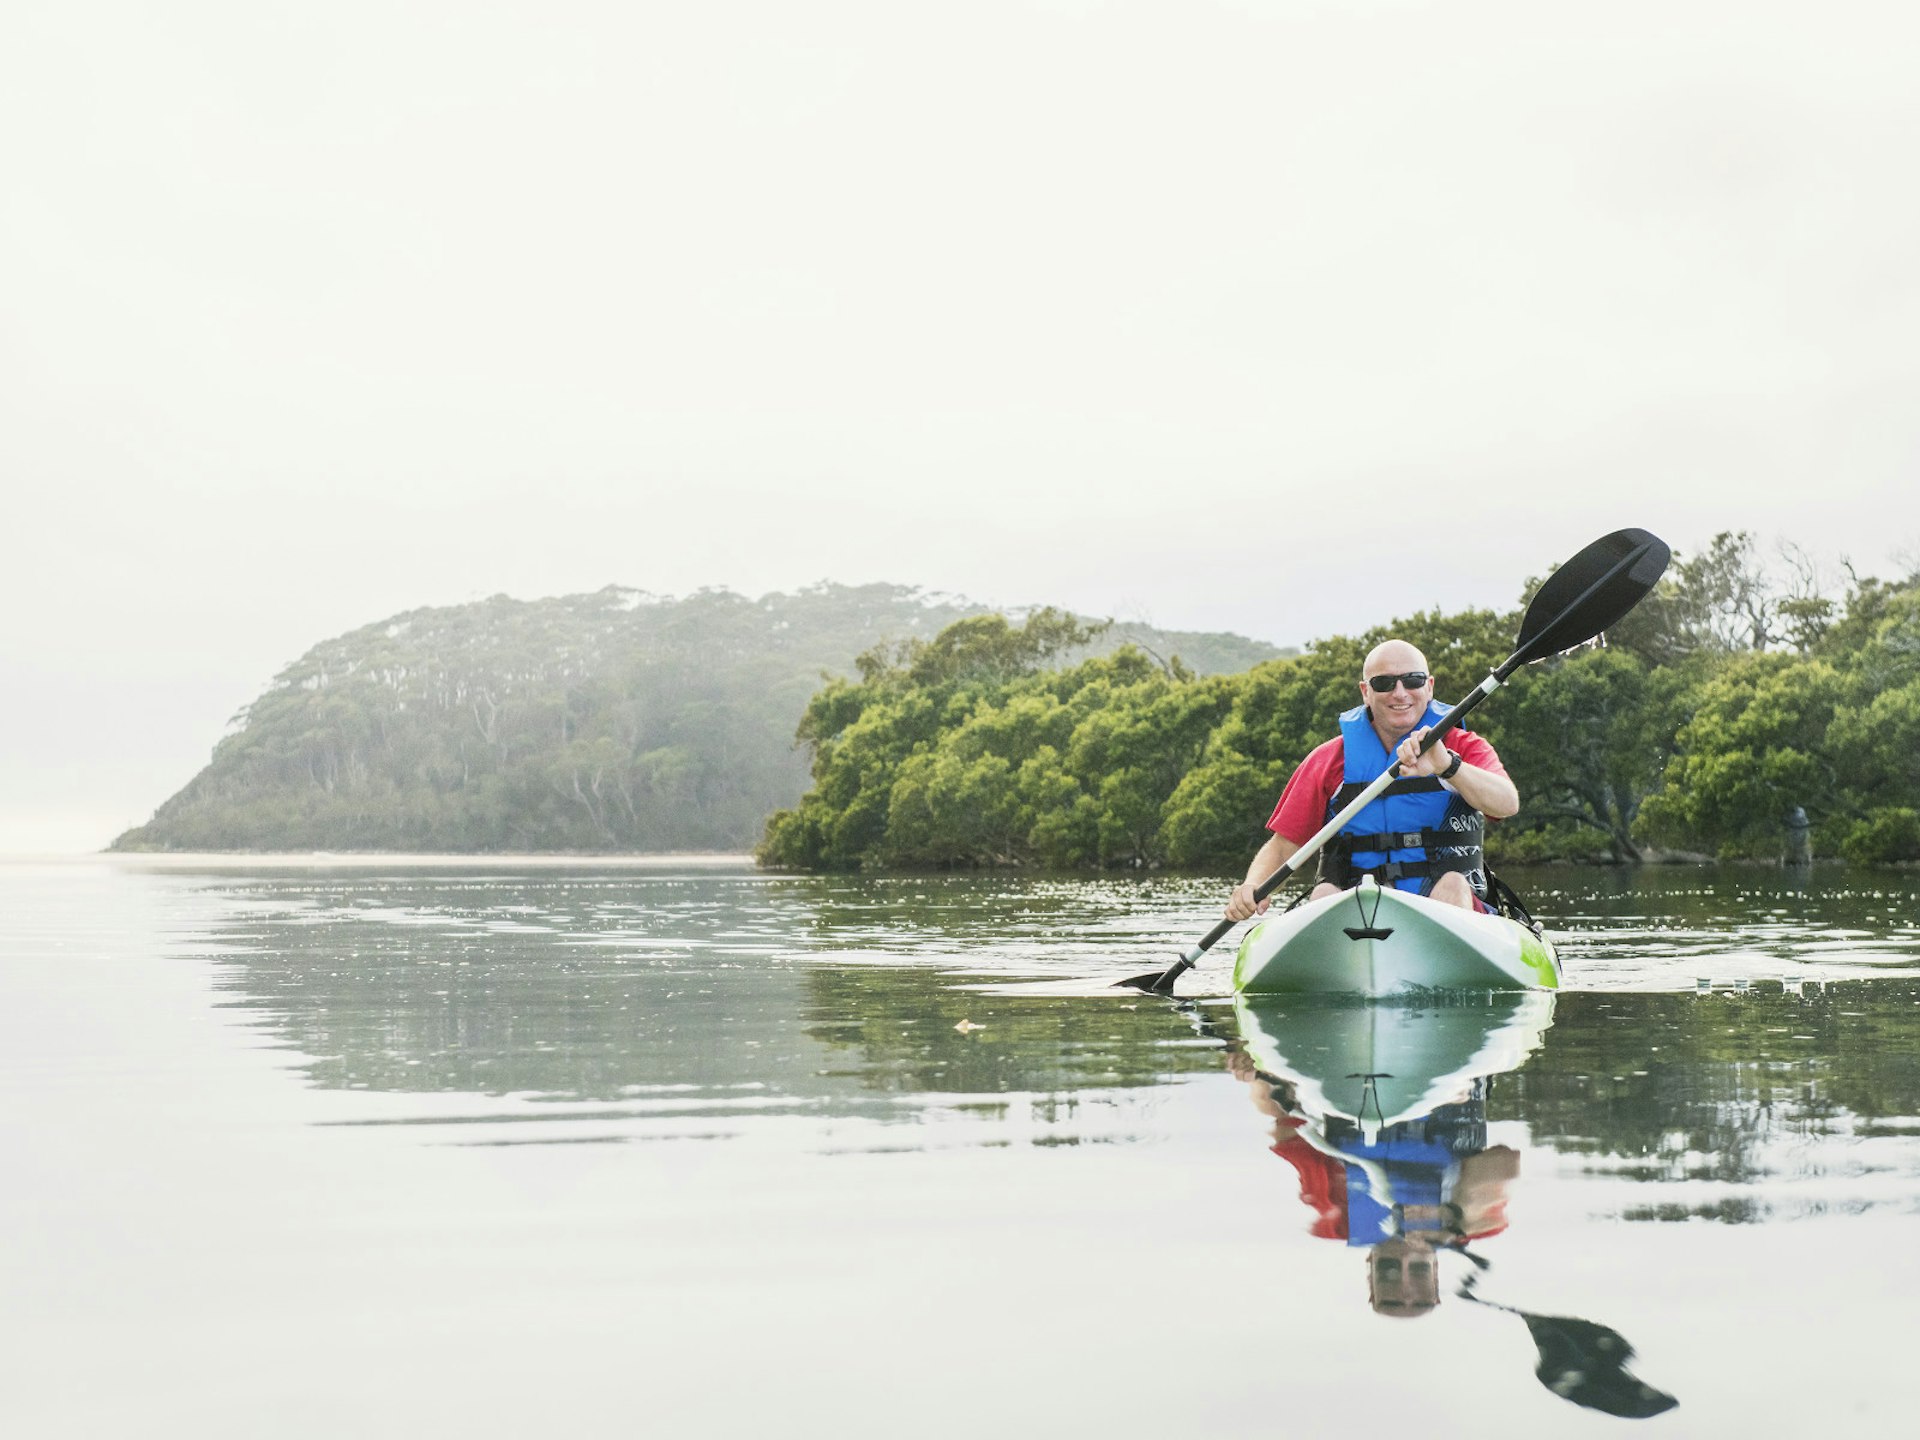 A man kayaking down the calm waters of the Narrawallee inlet